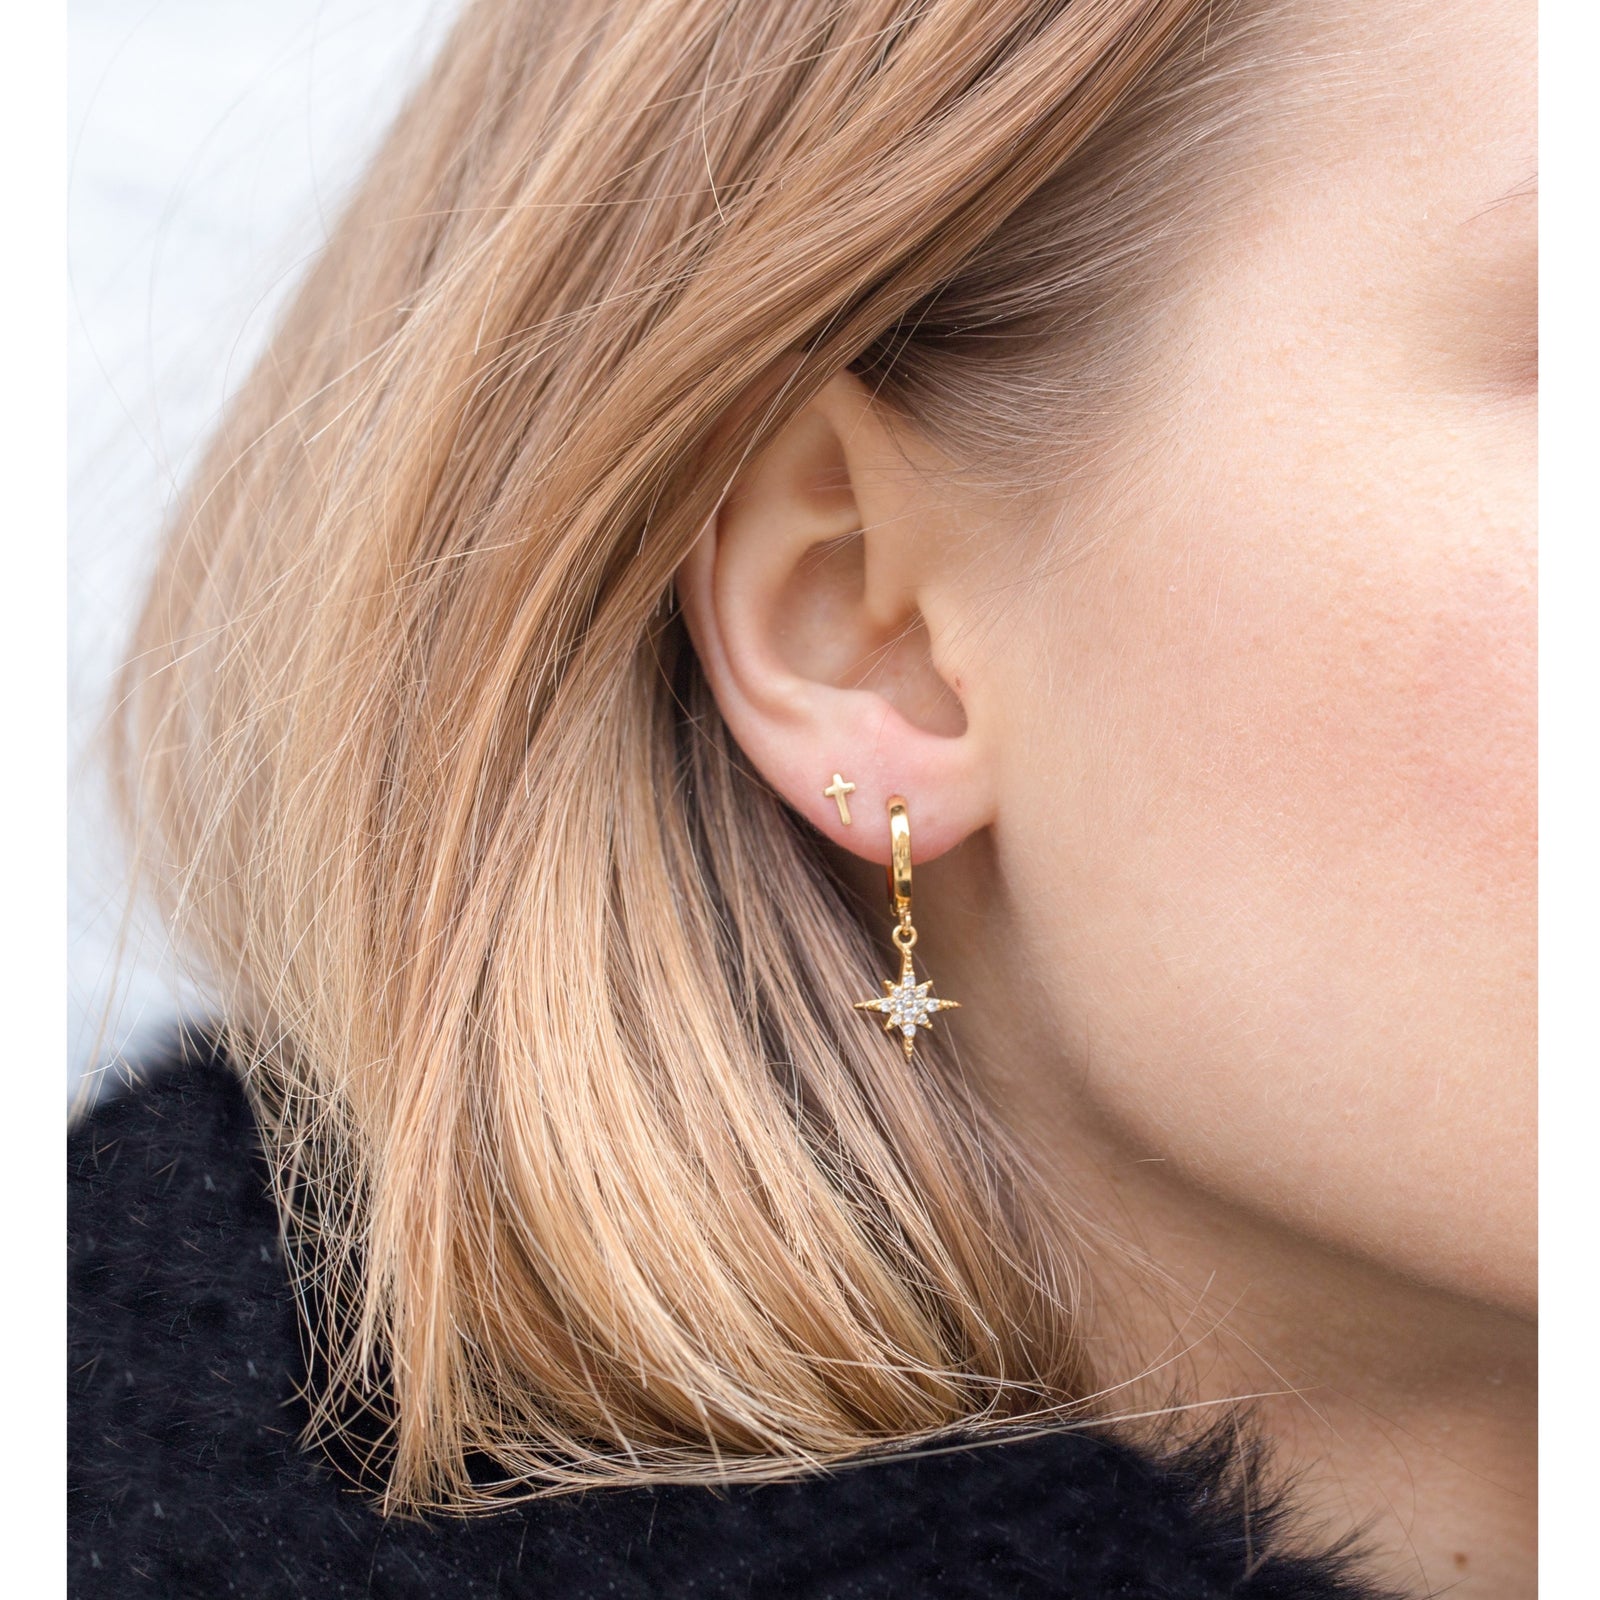 Twist small hoops by Dinny Hall